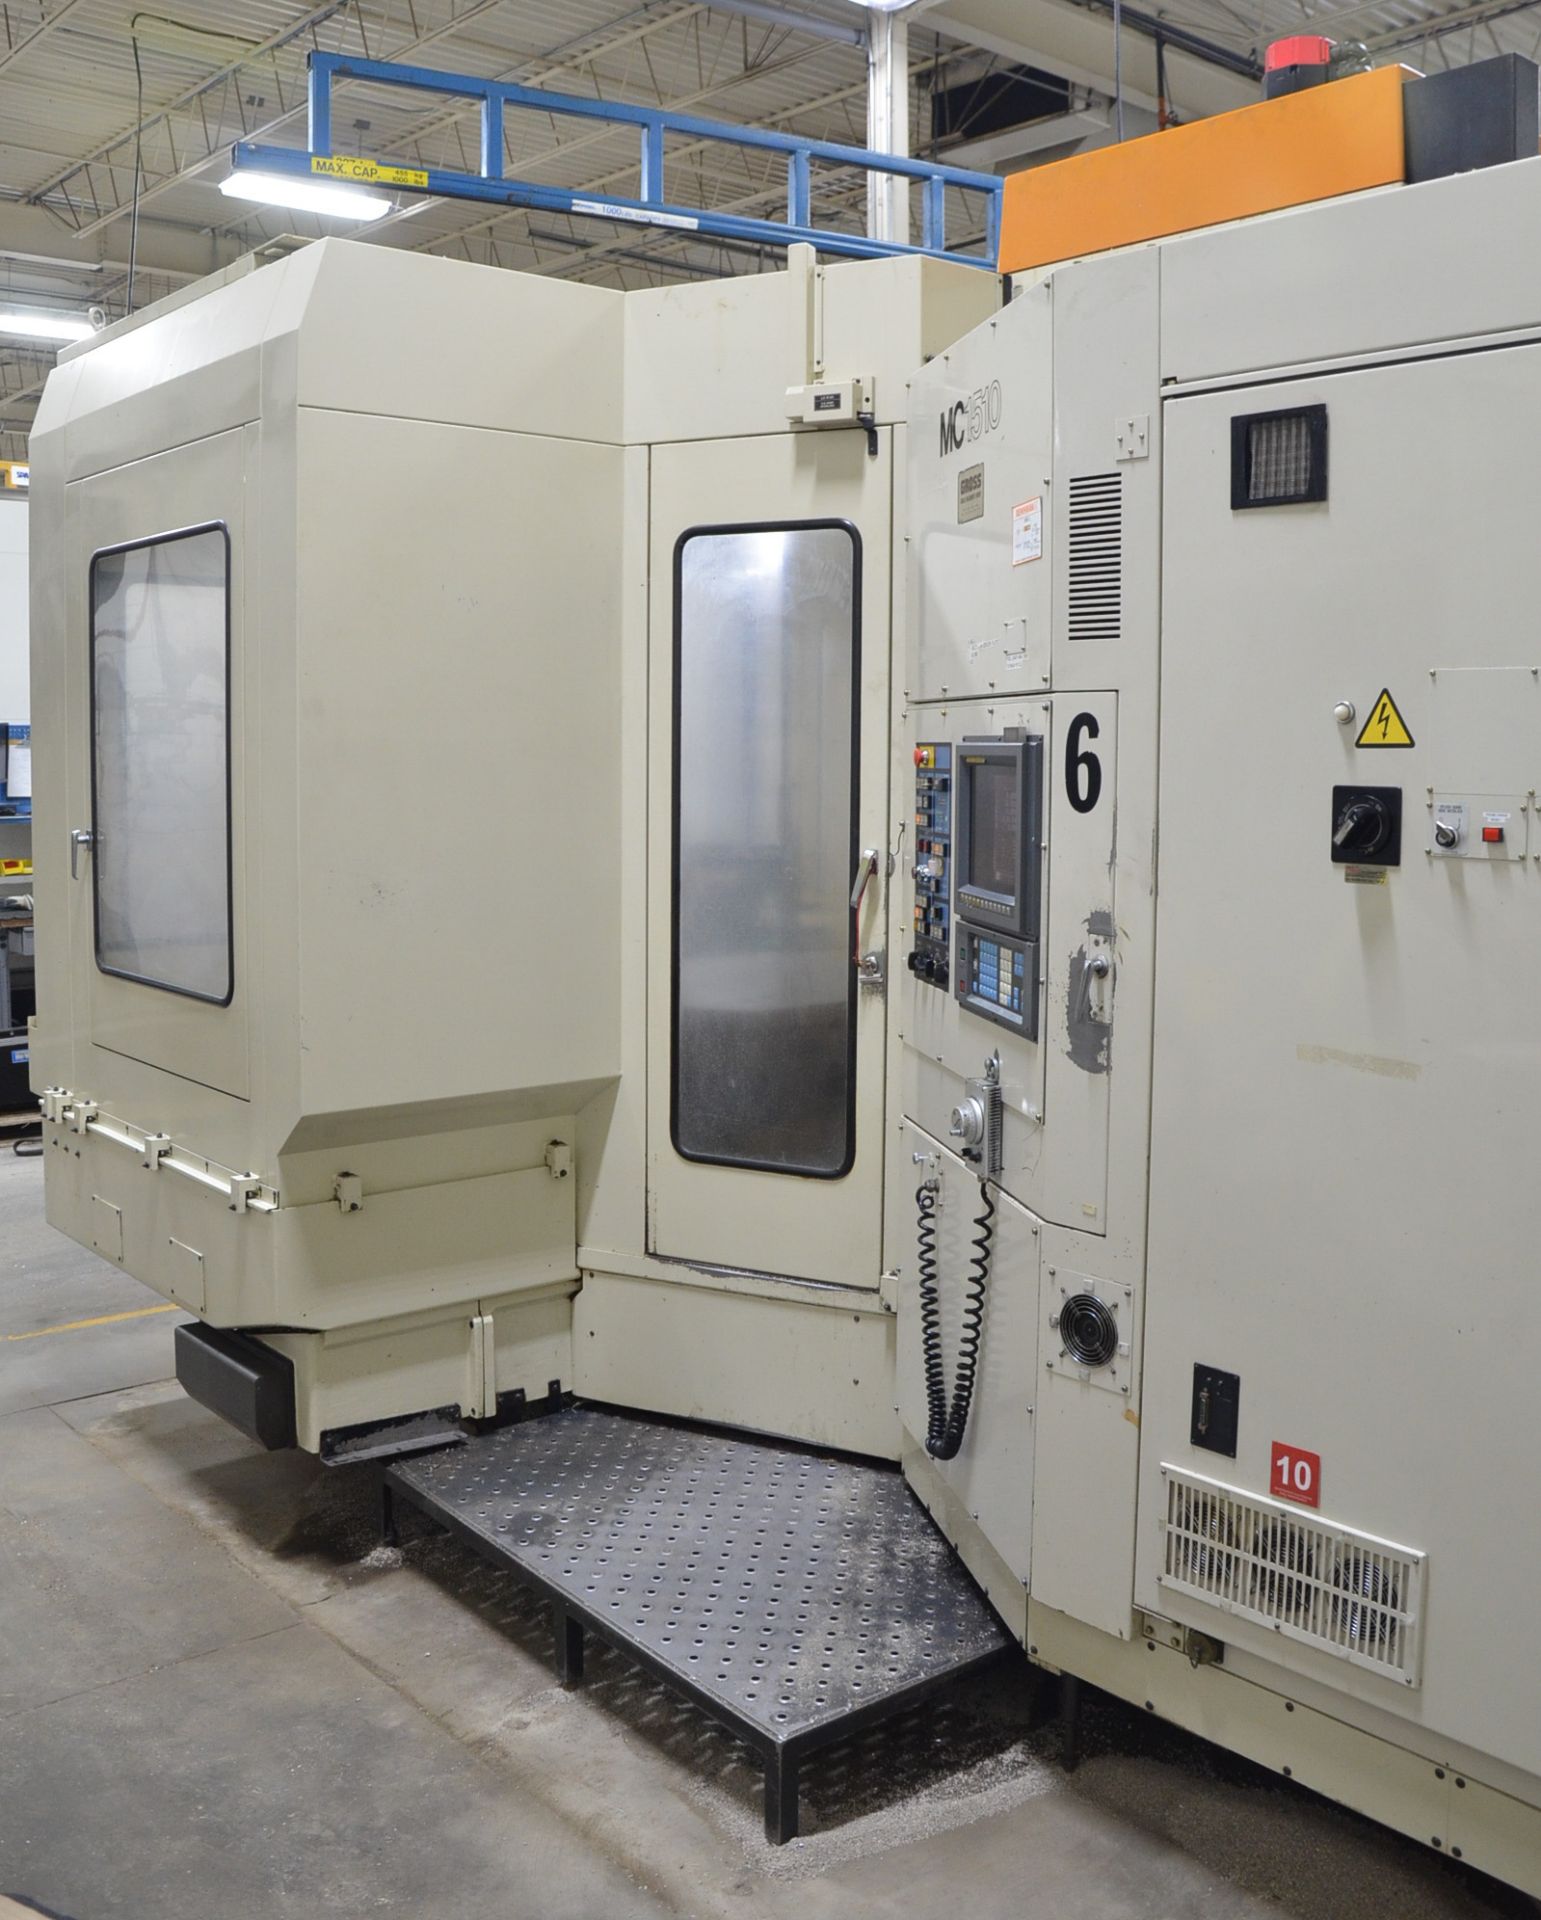 MAKINO MC-1510-A60 5 AXIS CNC HORIZONTAL MACHINING CENTER WITH FANUC SERIES 15-M CNC CONTROL, 40” - Image 3 of 17